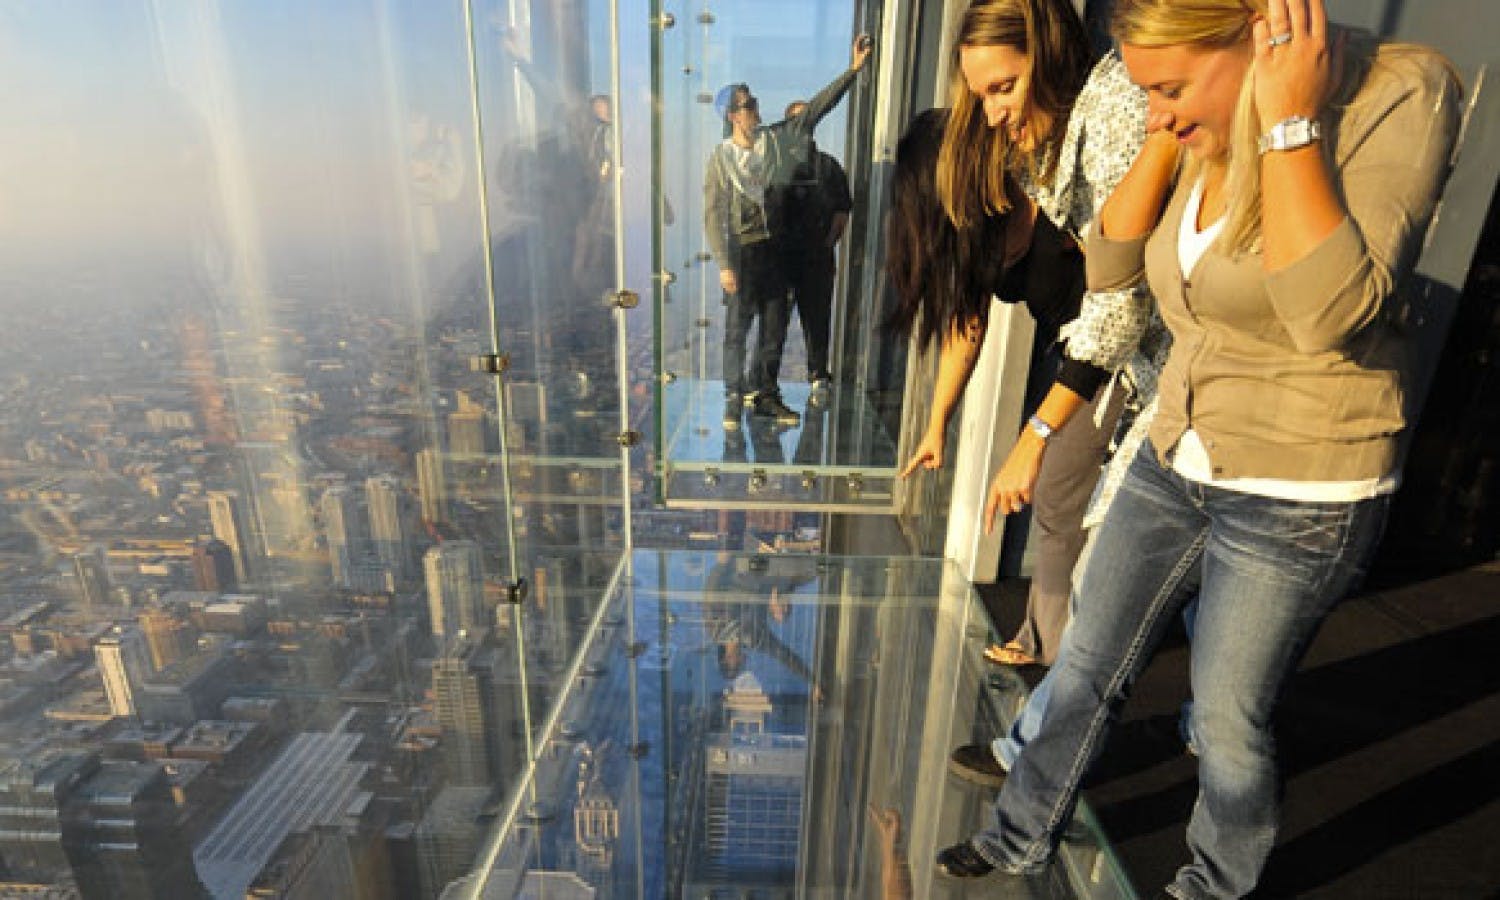 Willis Tower Skydeck Admission